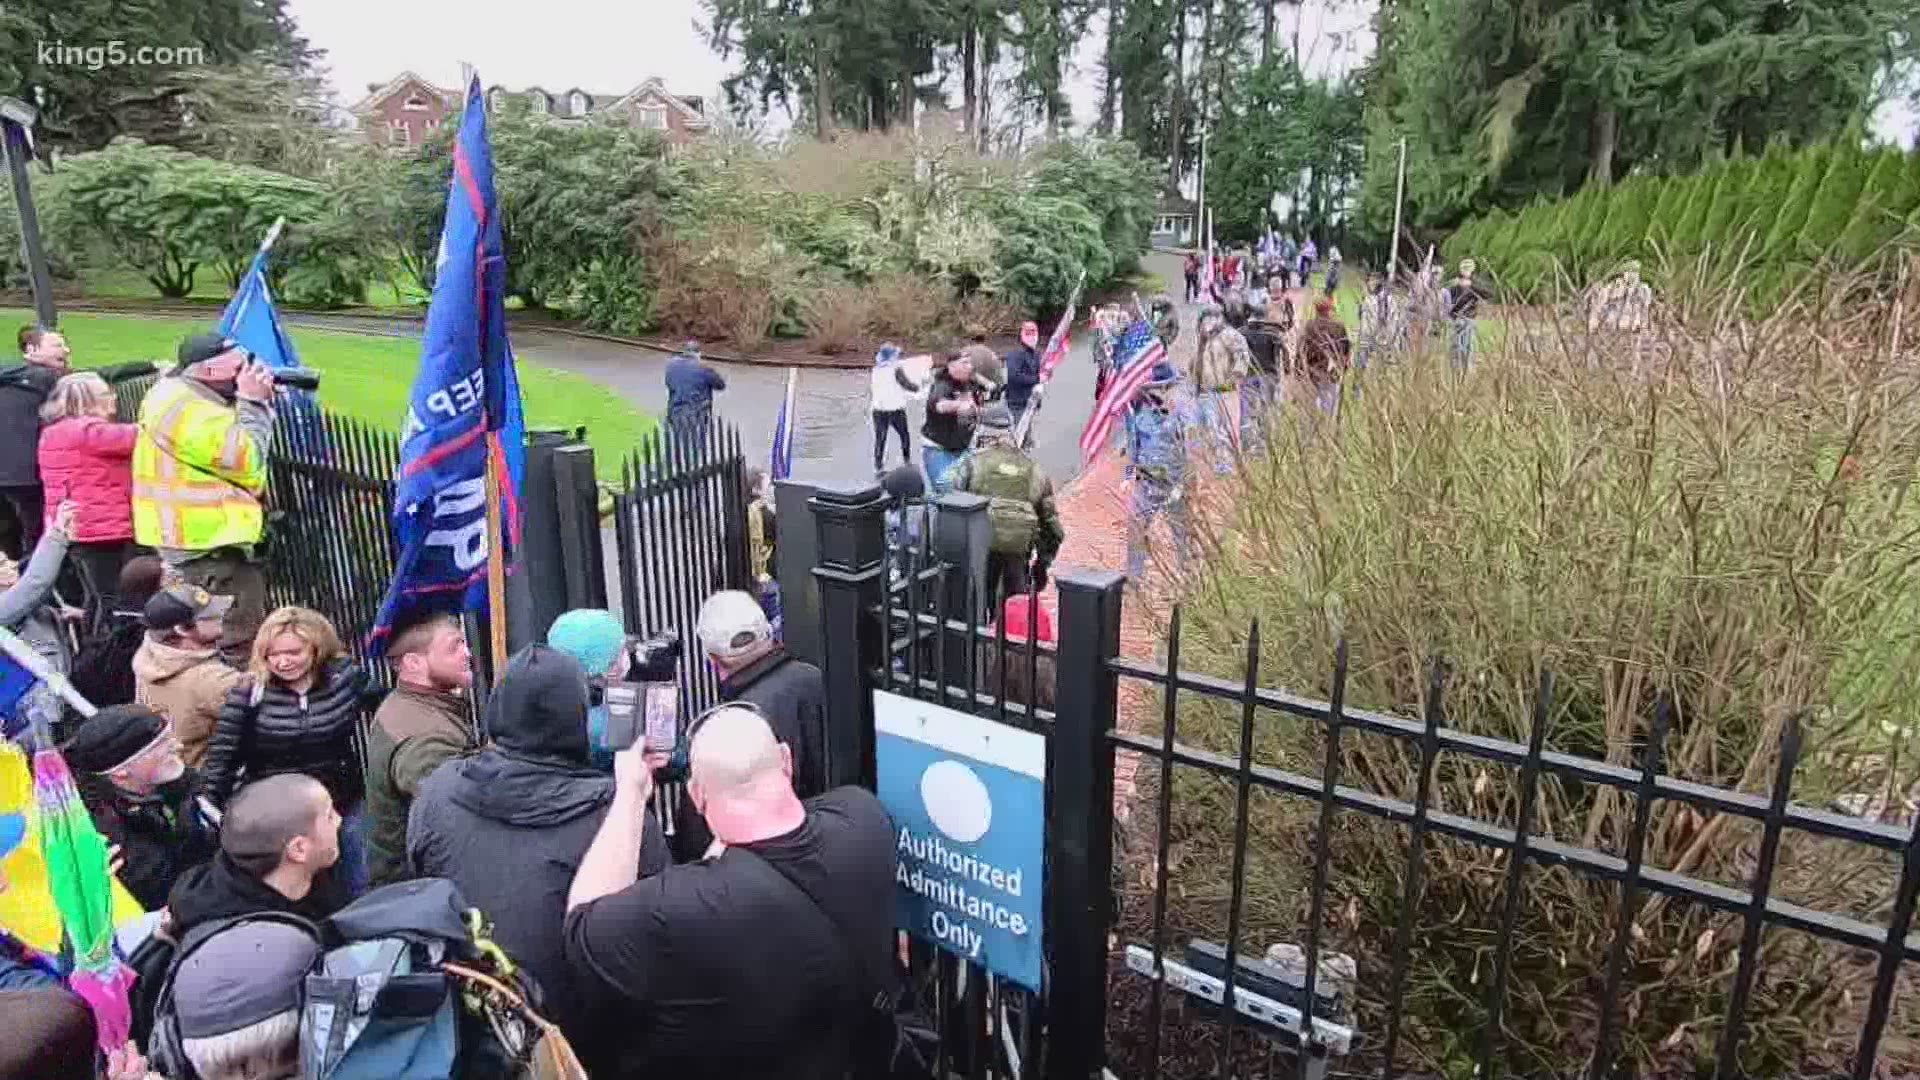 Trump supporters breached a gate at the Washington Governor's Mansion in Olympia around 3 p.m. Wednesday after a peaceful rally earlier in the day.